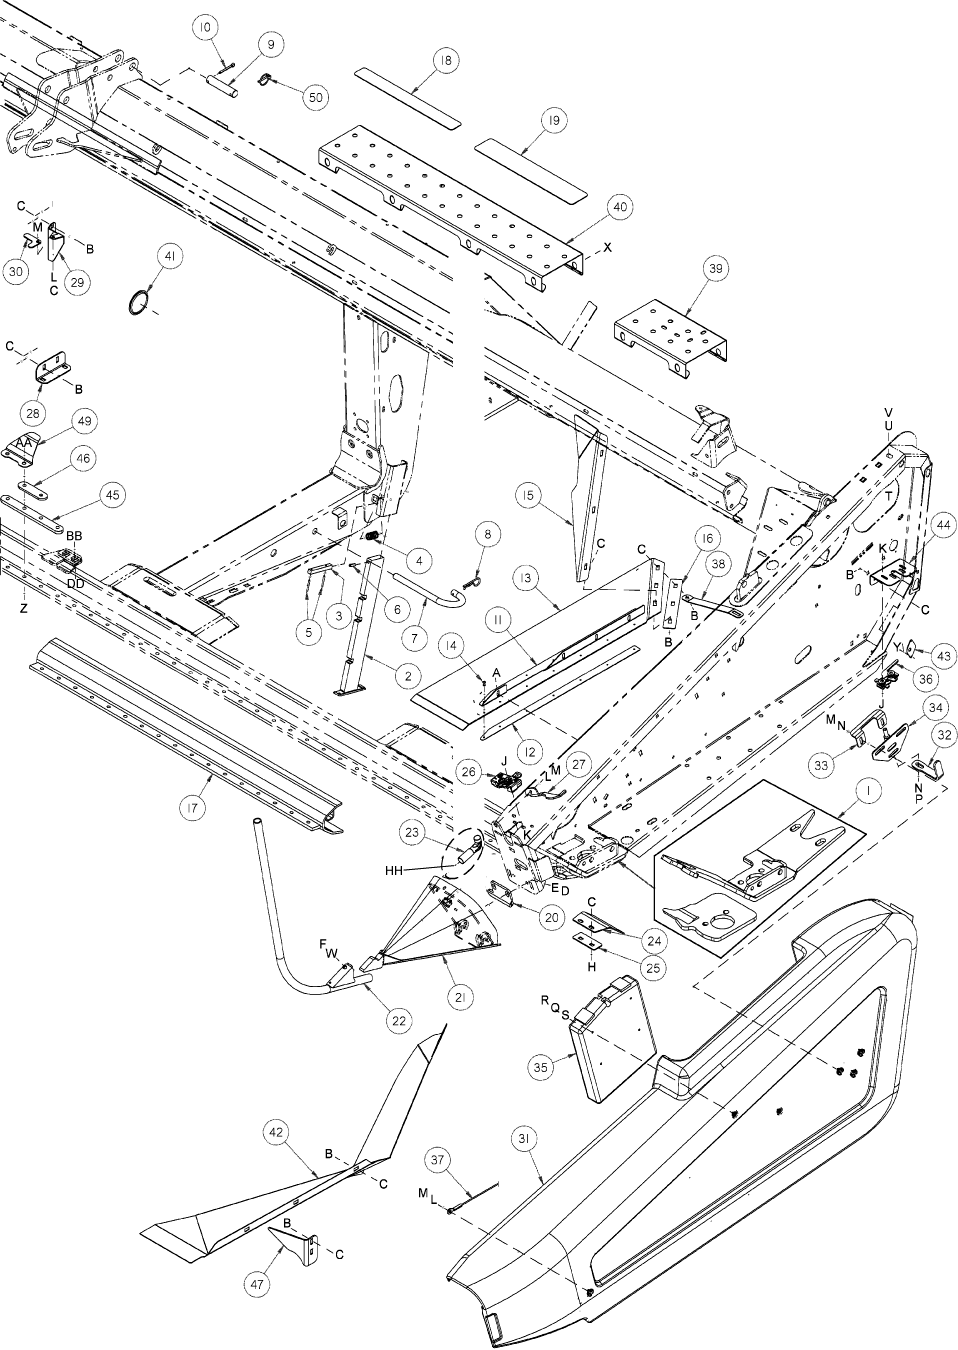 09-01 FRAME AND COMPONENTS